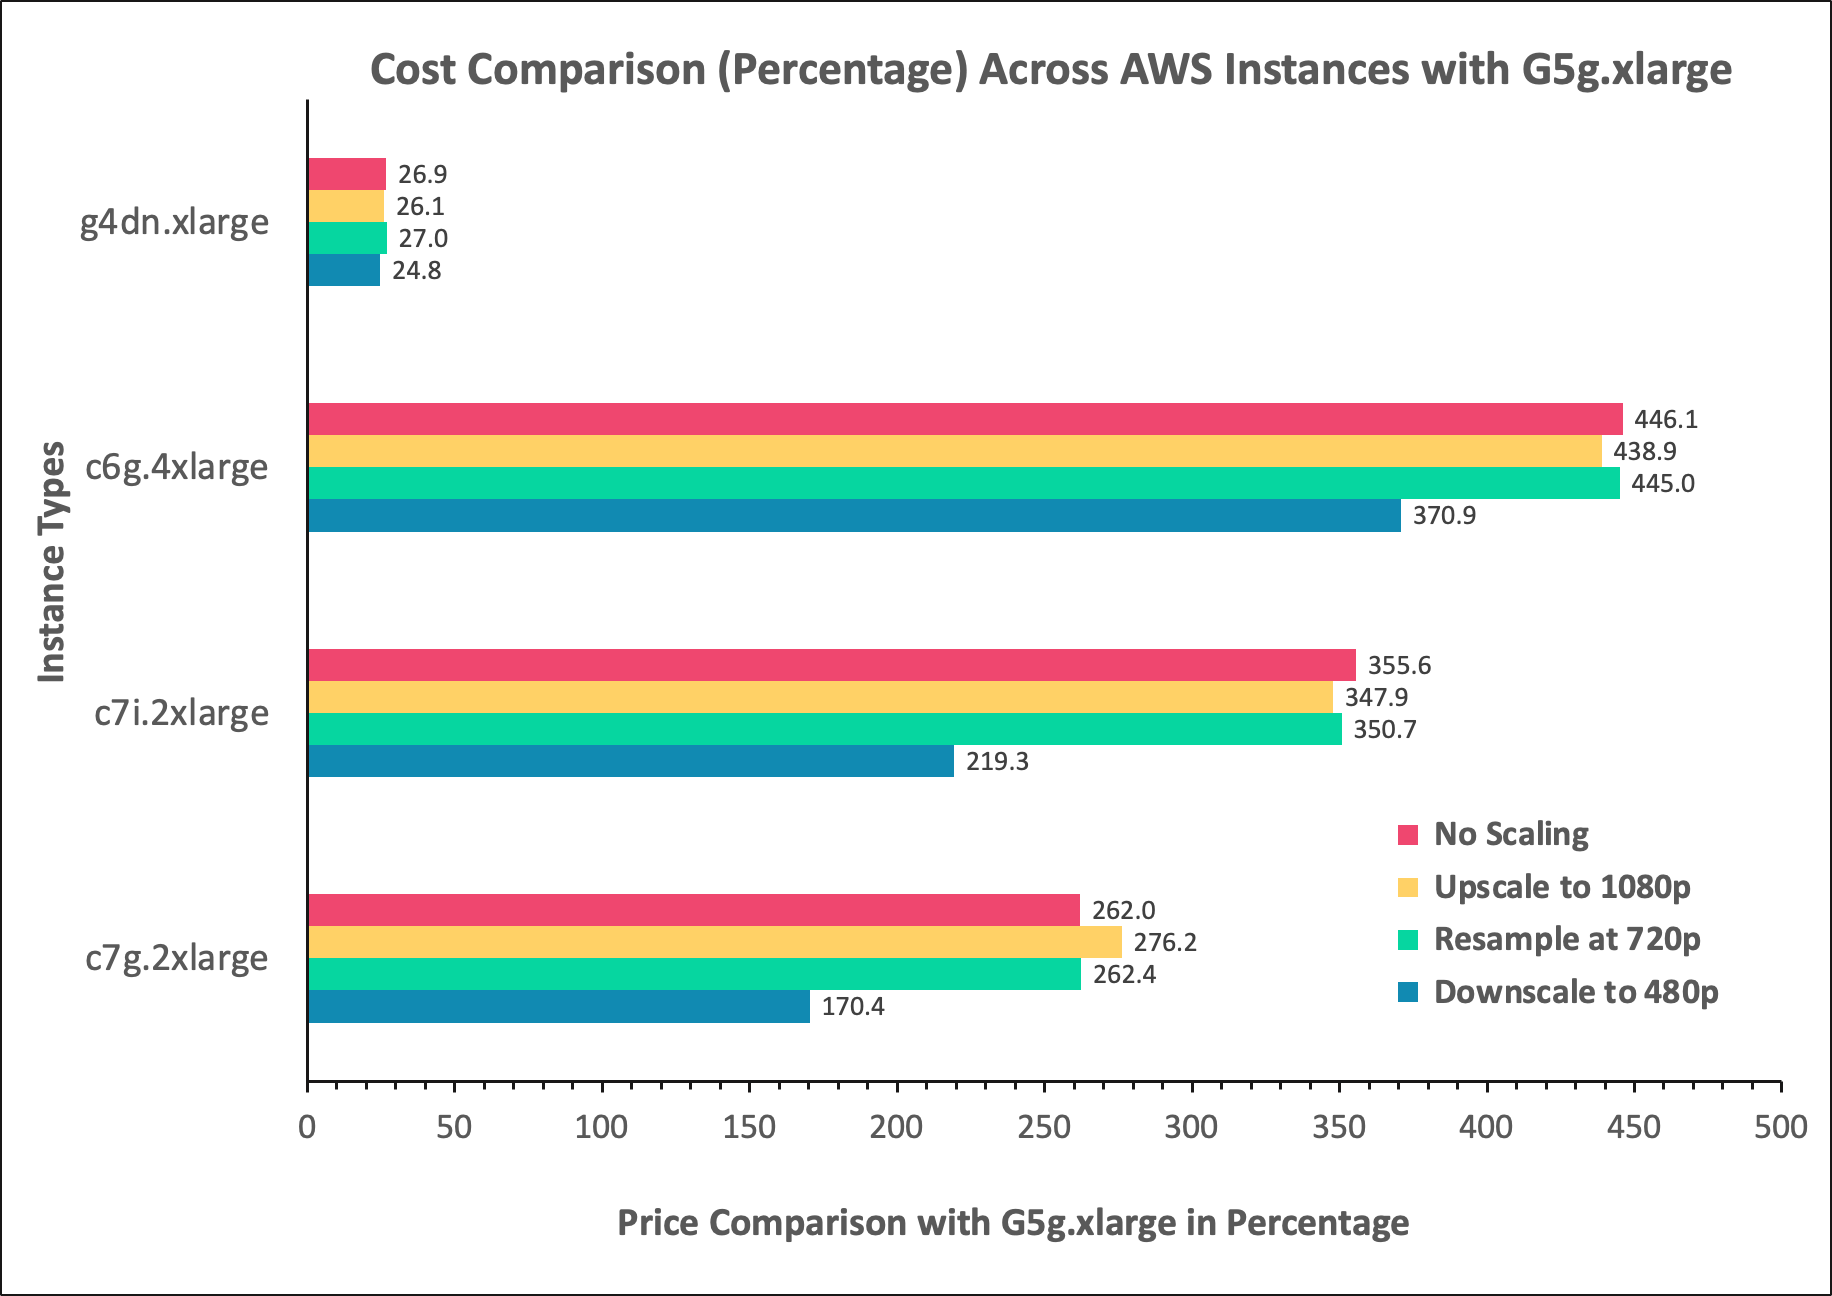 Cost Comparison (Percentage) Across AWS Instances with G5g.xlarge